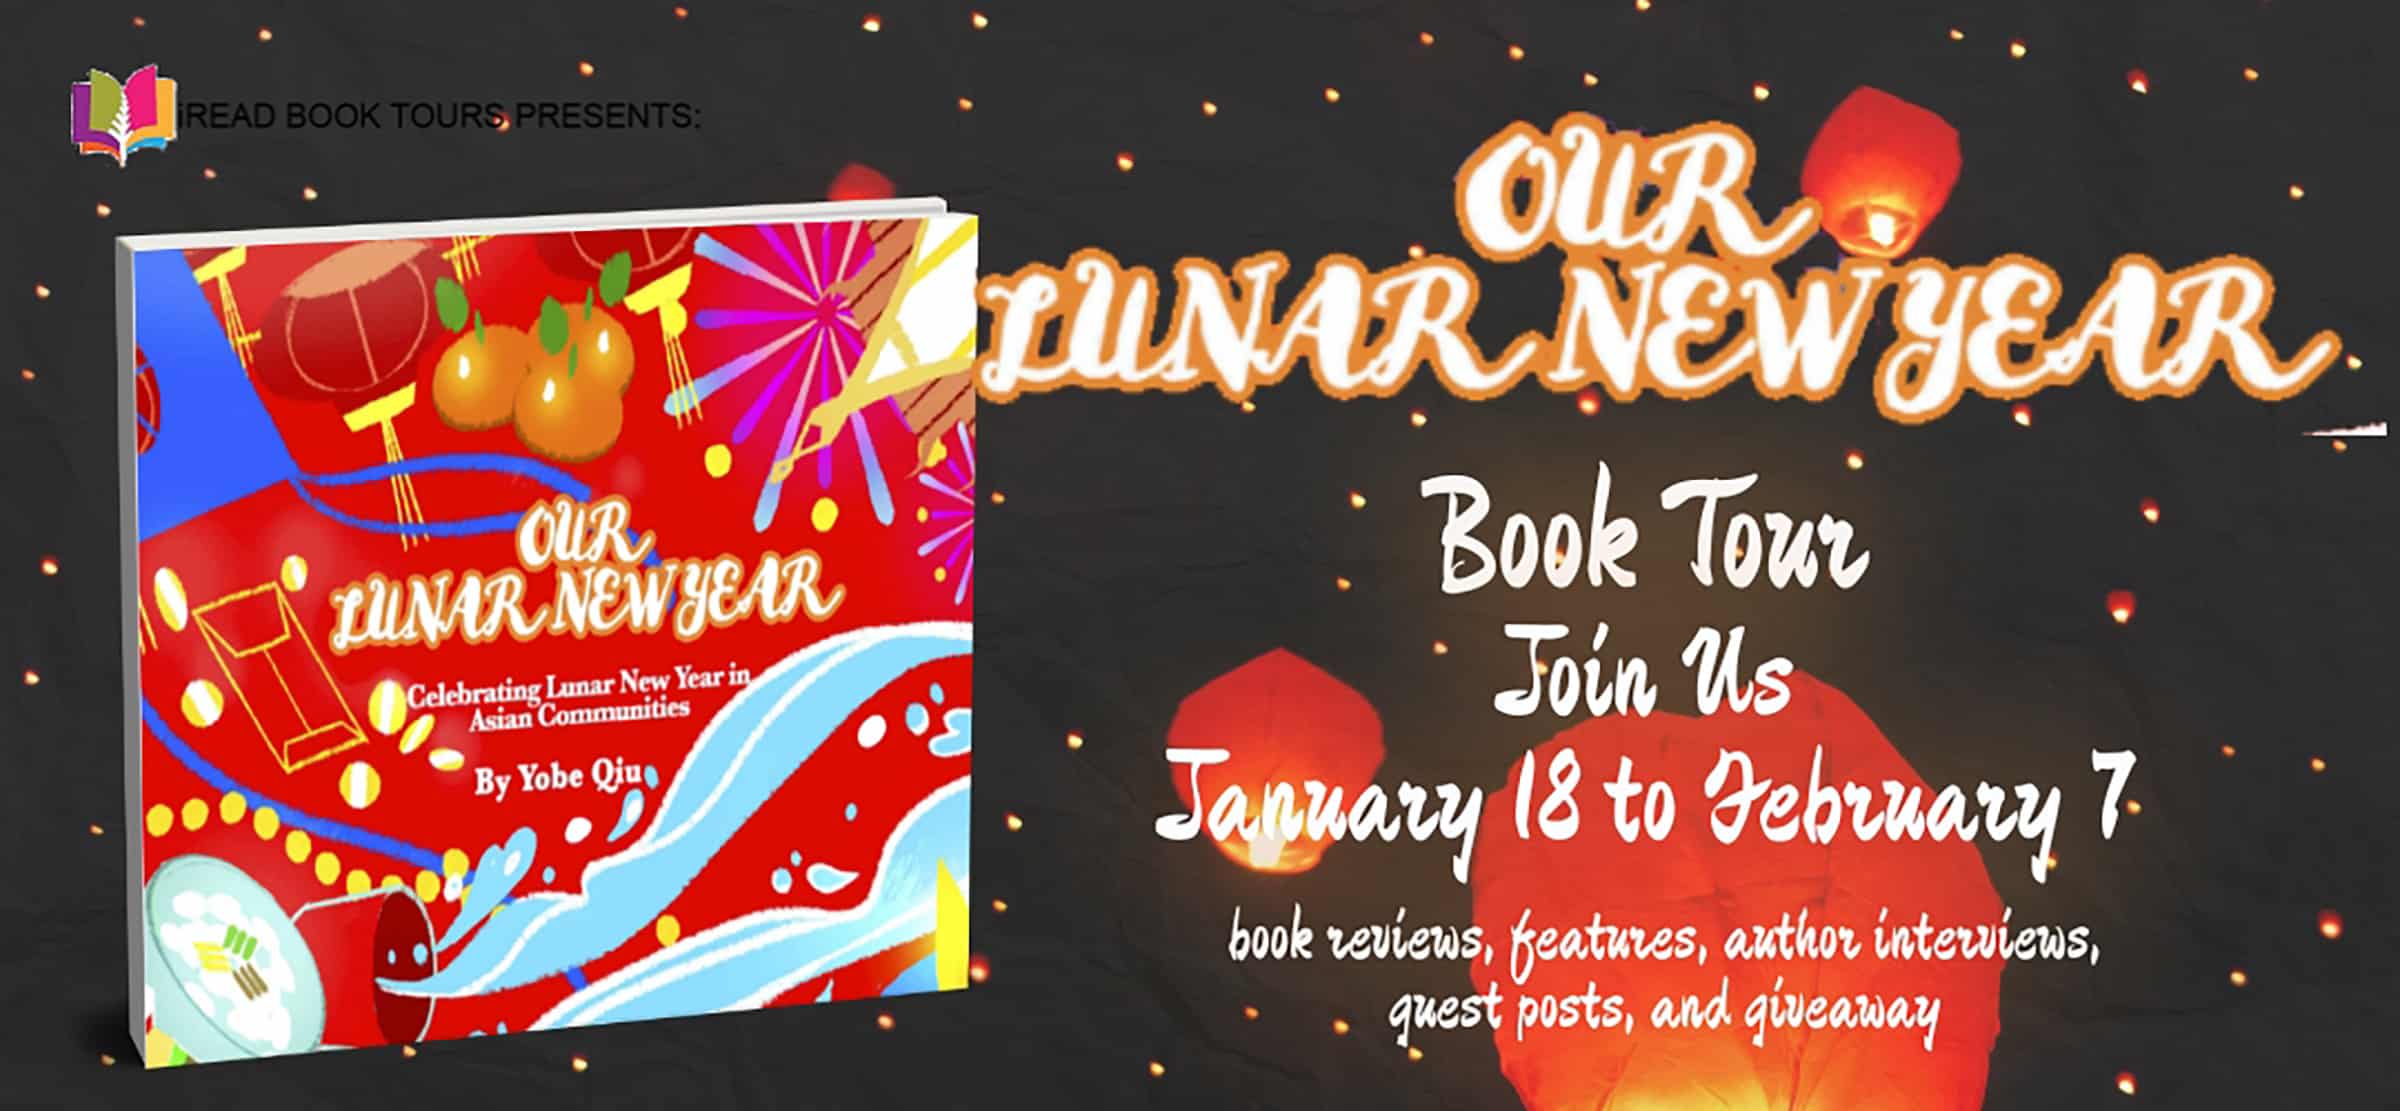 Our Lunar New Year: Celebrating Lunar New Year in Asian Communities by Yobe Qiu | Giveaway & 5-Star Review